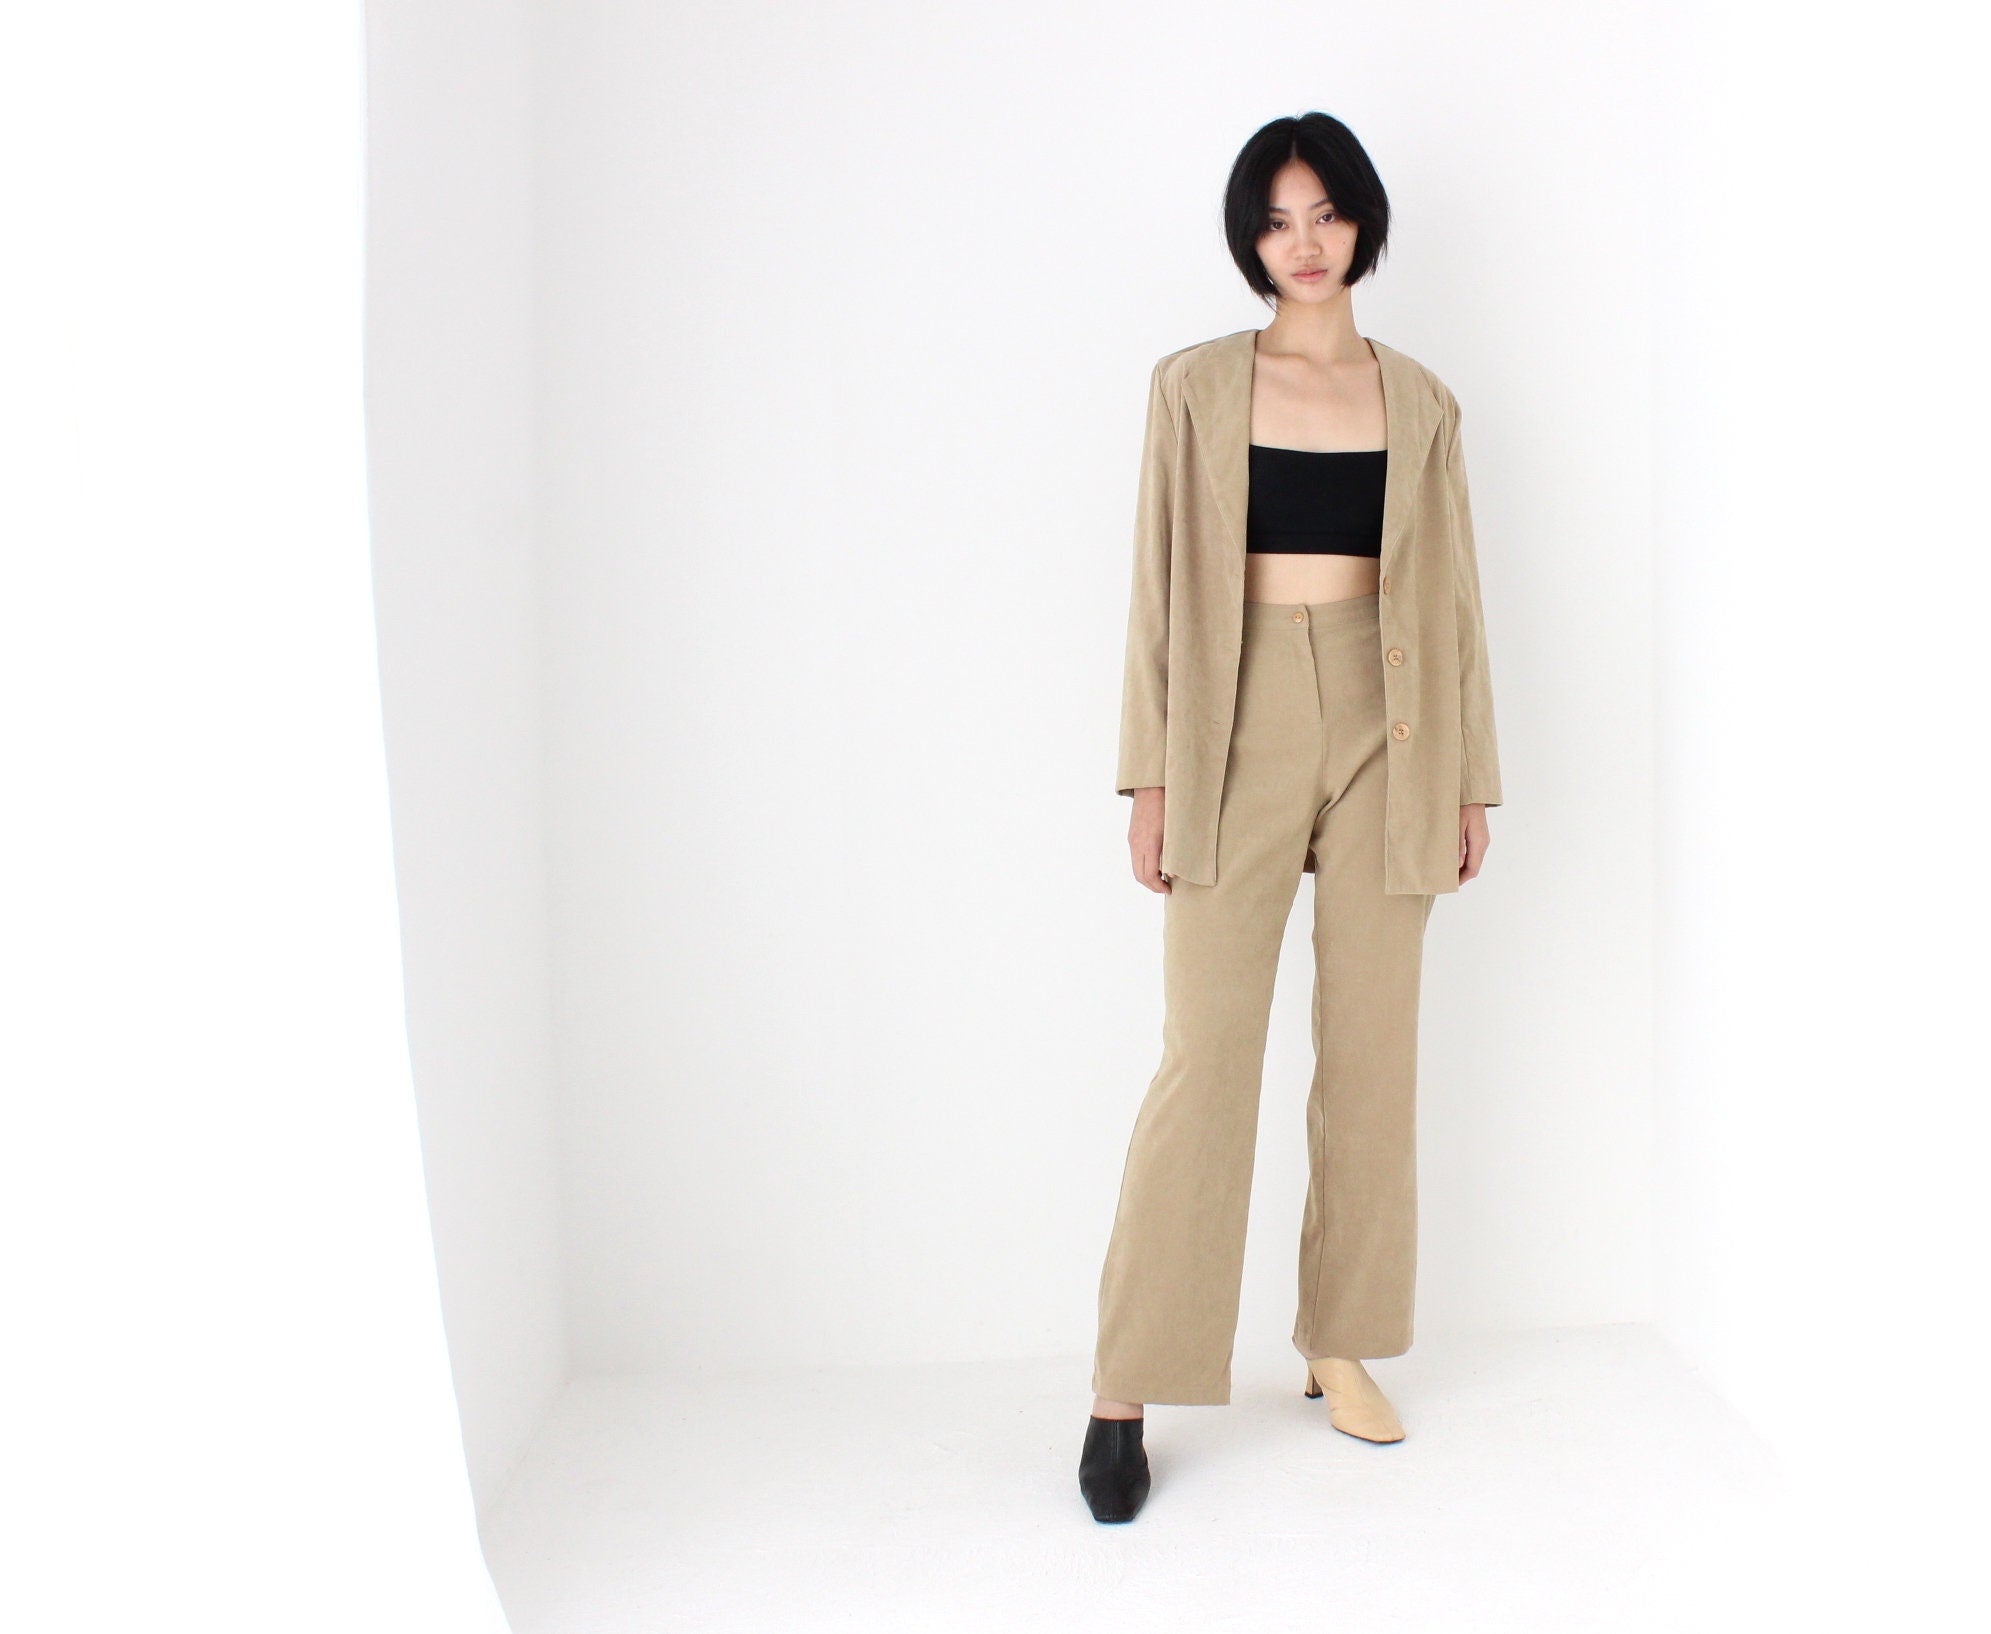 90s Suede Feel Neutral Camel Two Piece Pant Suit